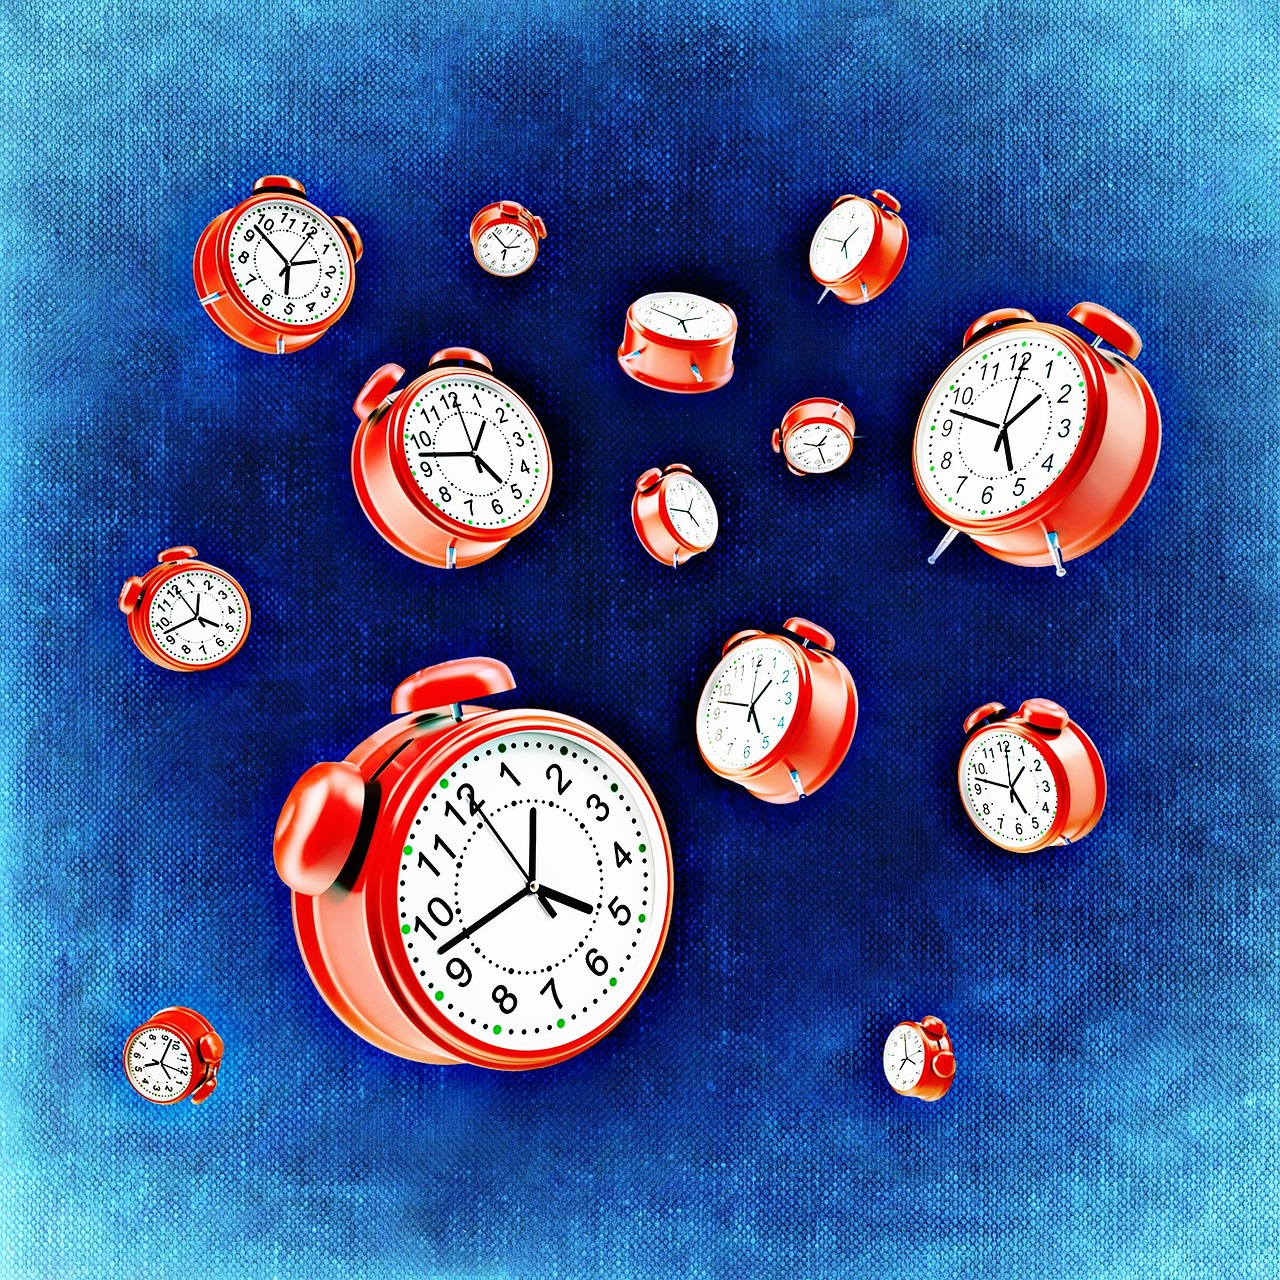 Does anyone know what time it is? Pixabay.